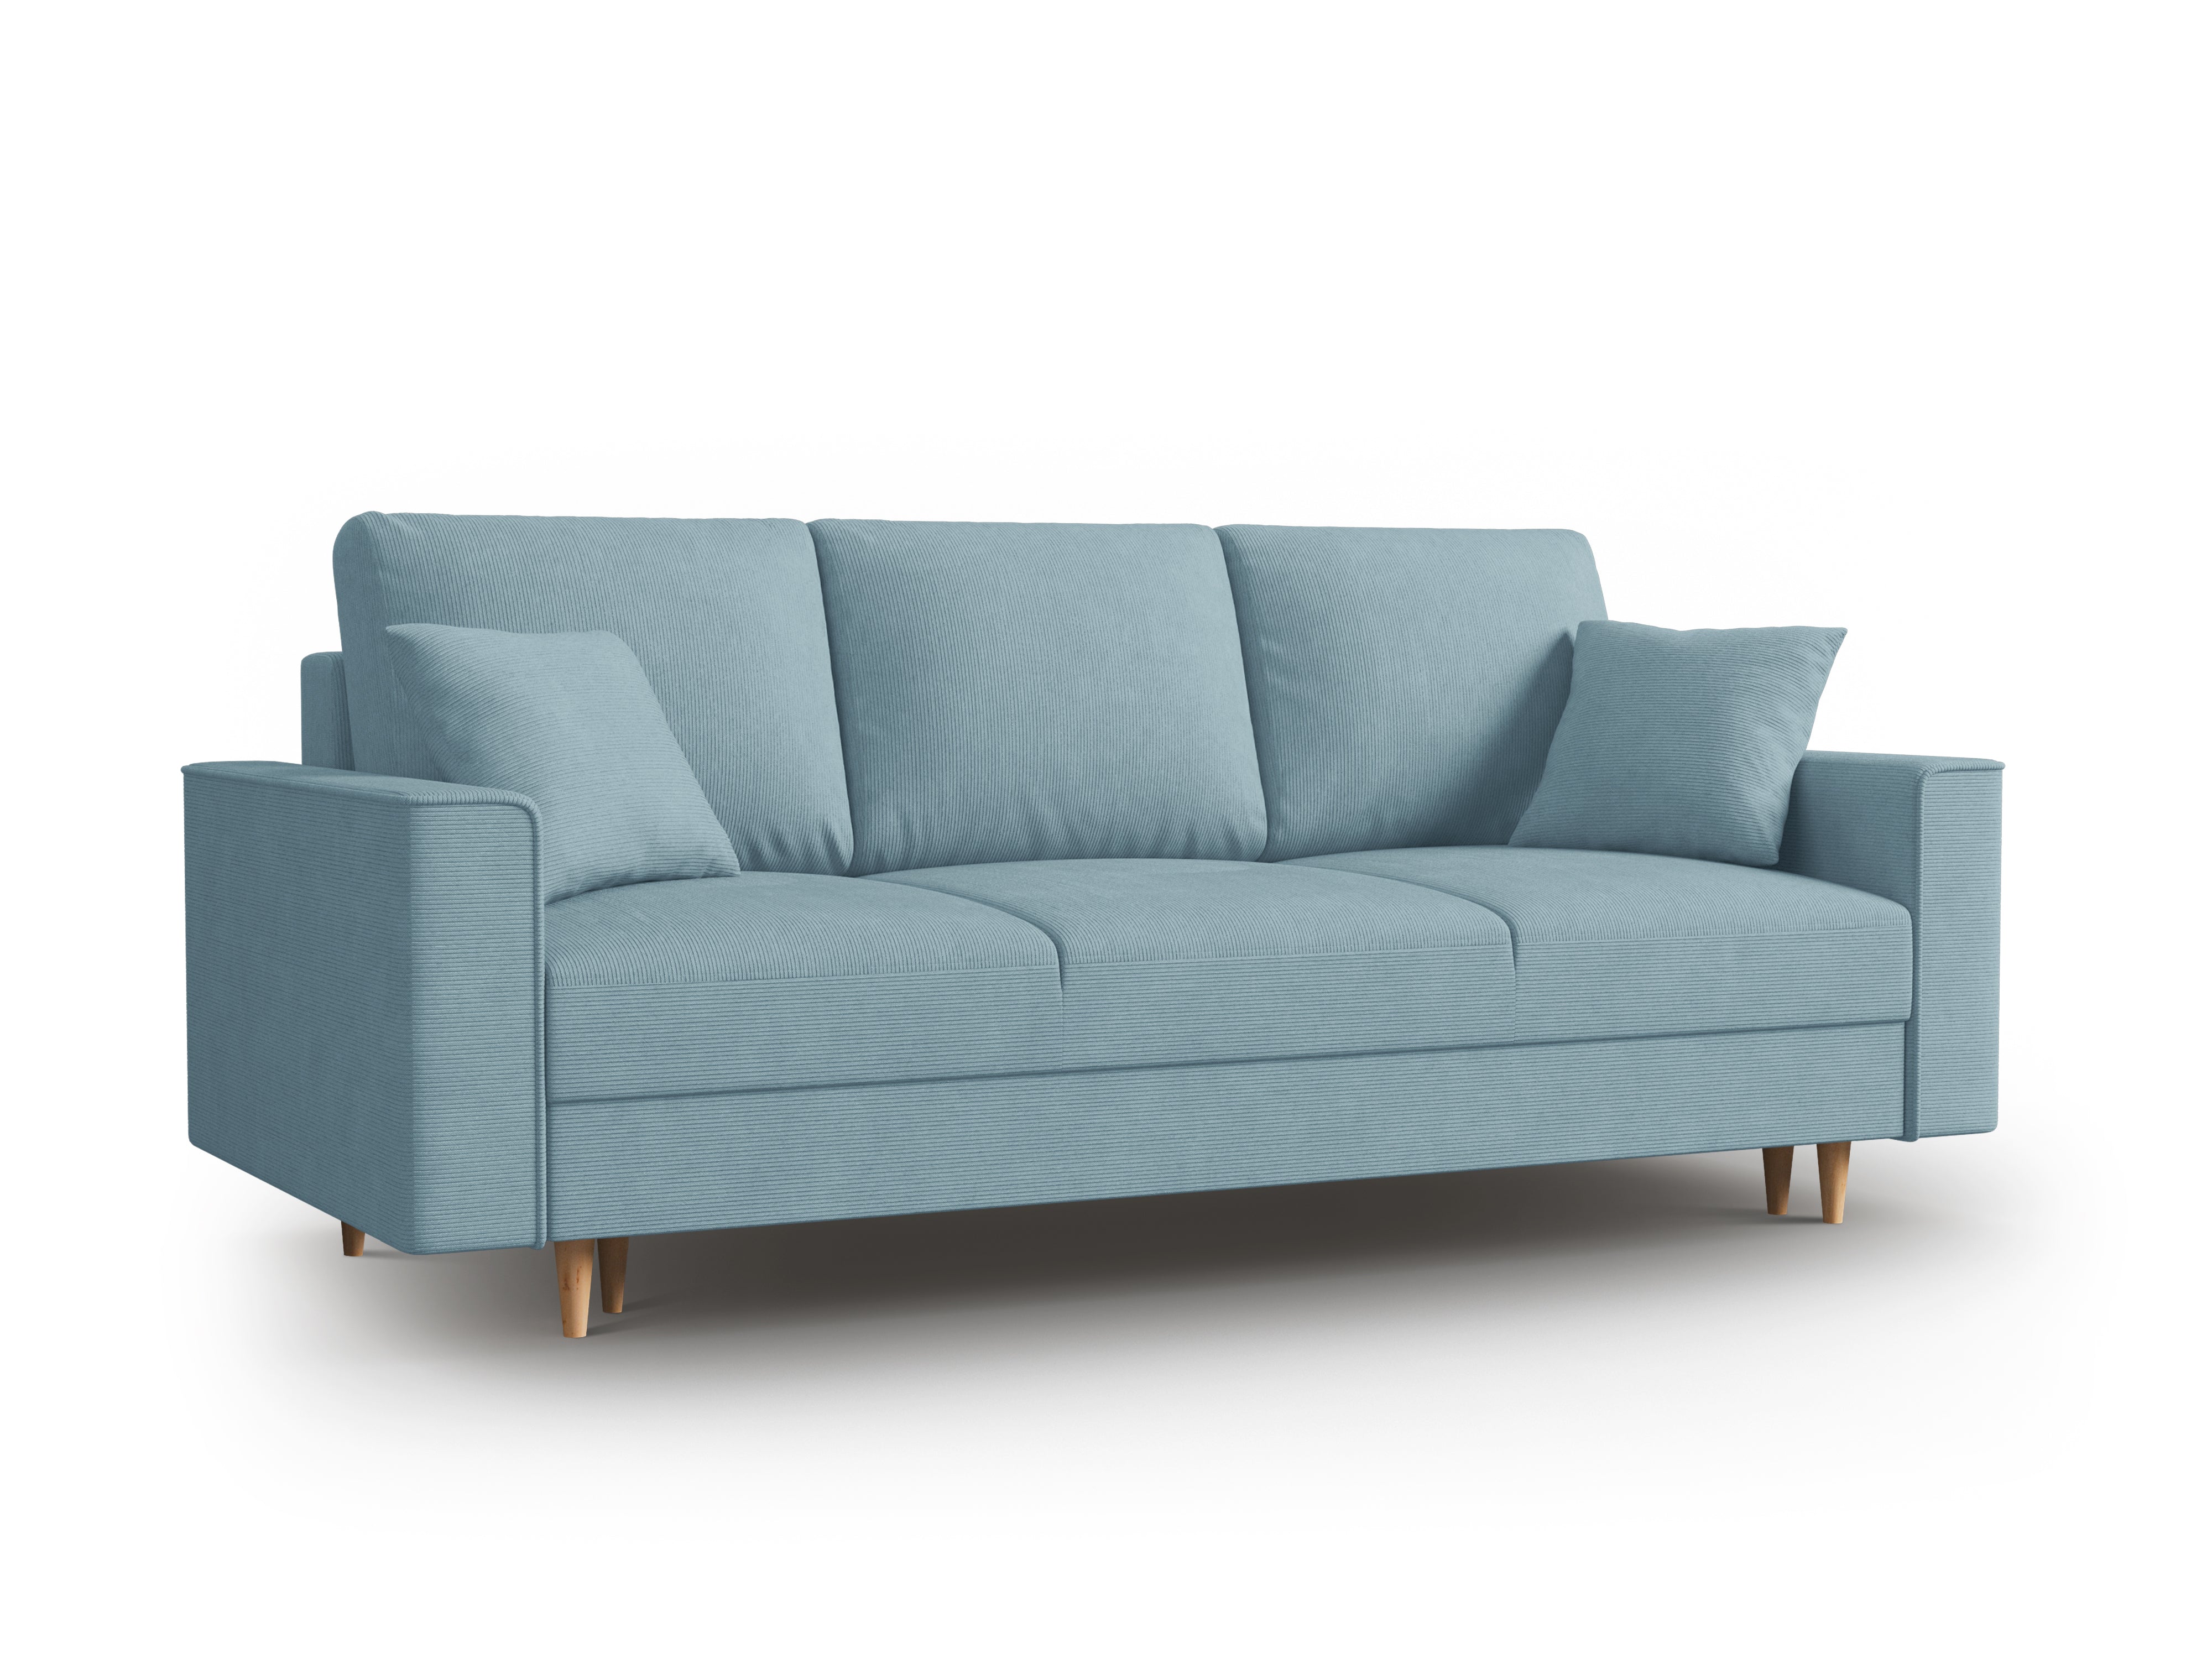 Sofa With Bed Function And Box, "Cartadera", 3 Seats, 222x100x92
Made in Europe, Mazzini Sofas, Eye on Design